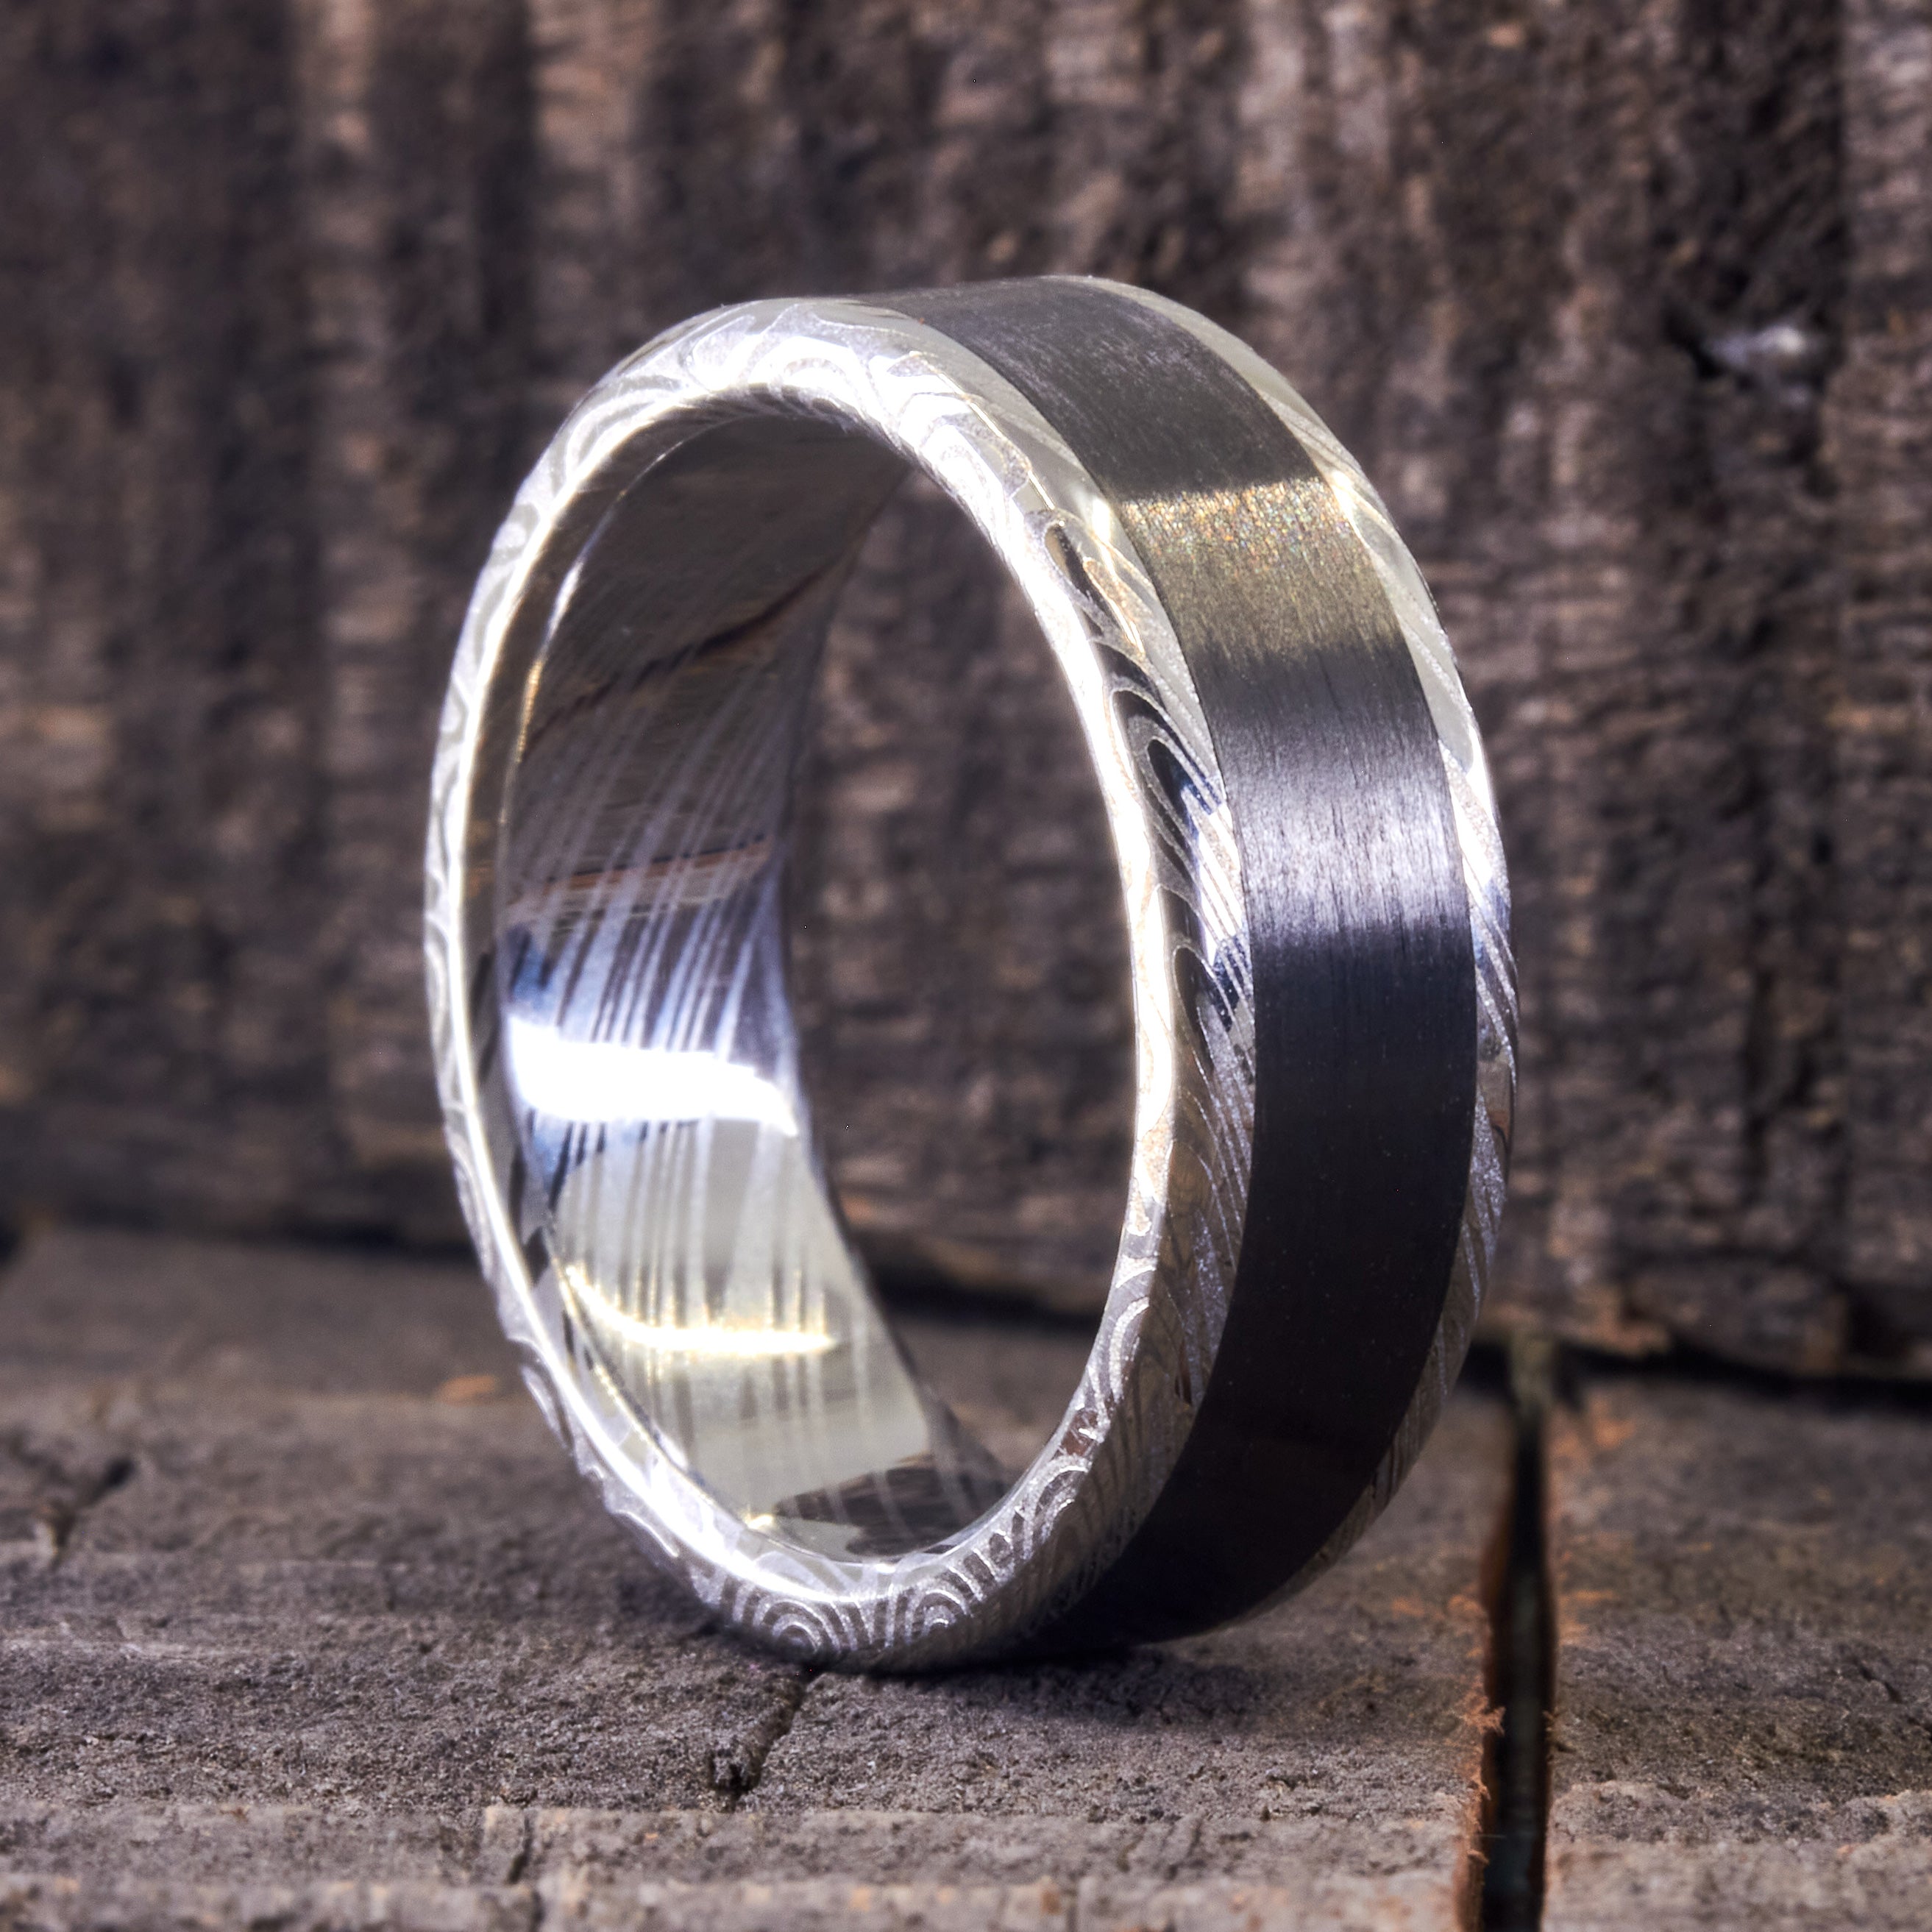 Polished Damascus steel and Carbon fiber women ring